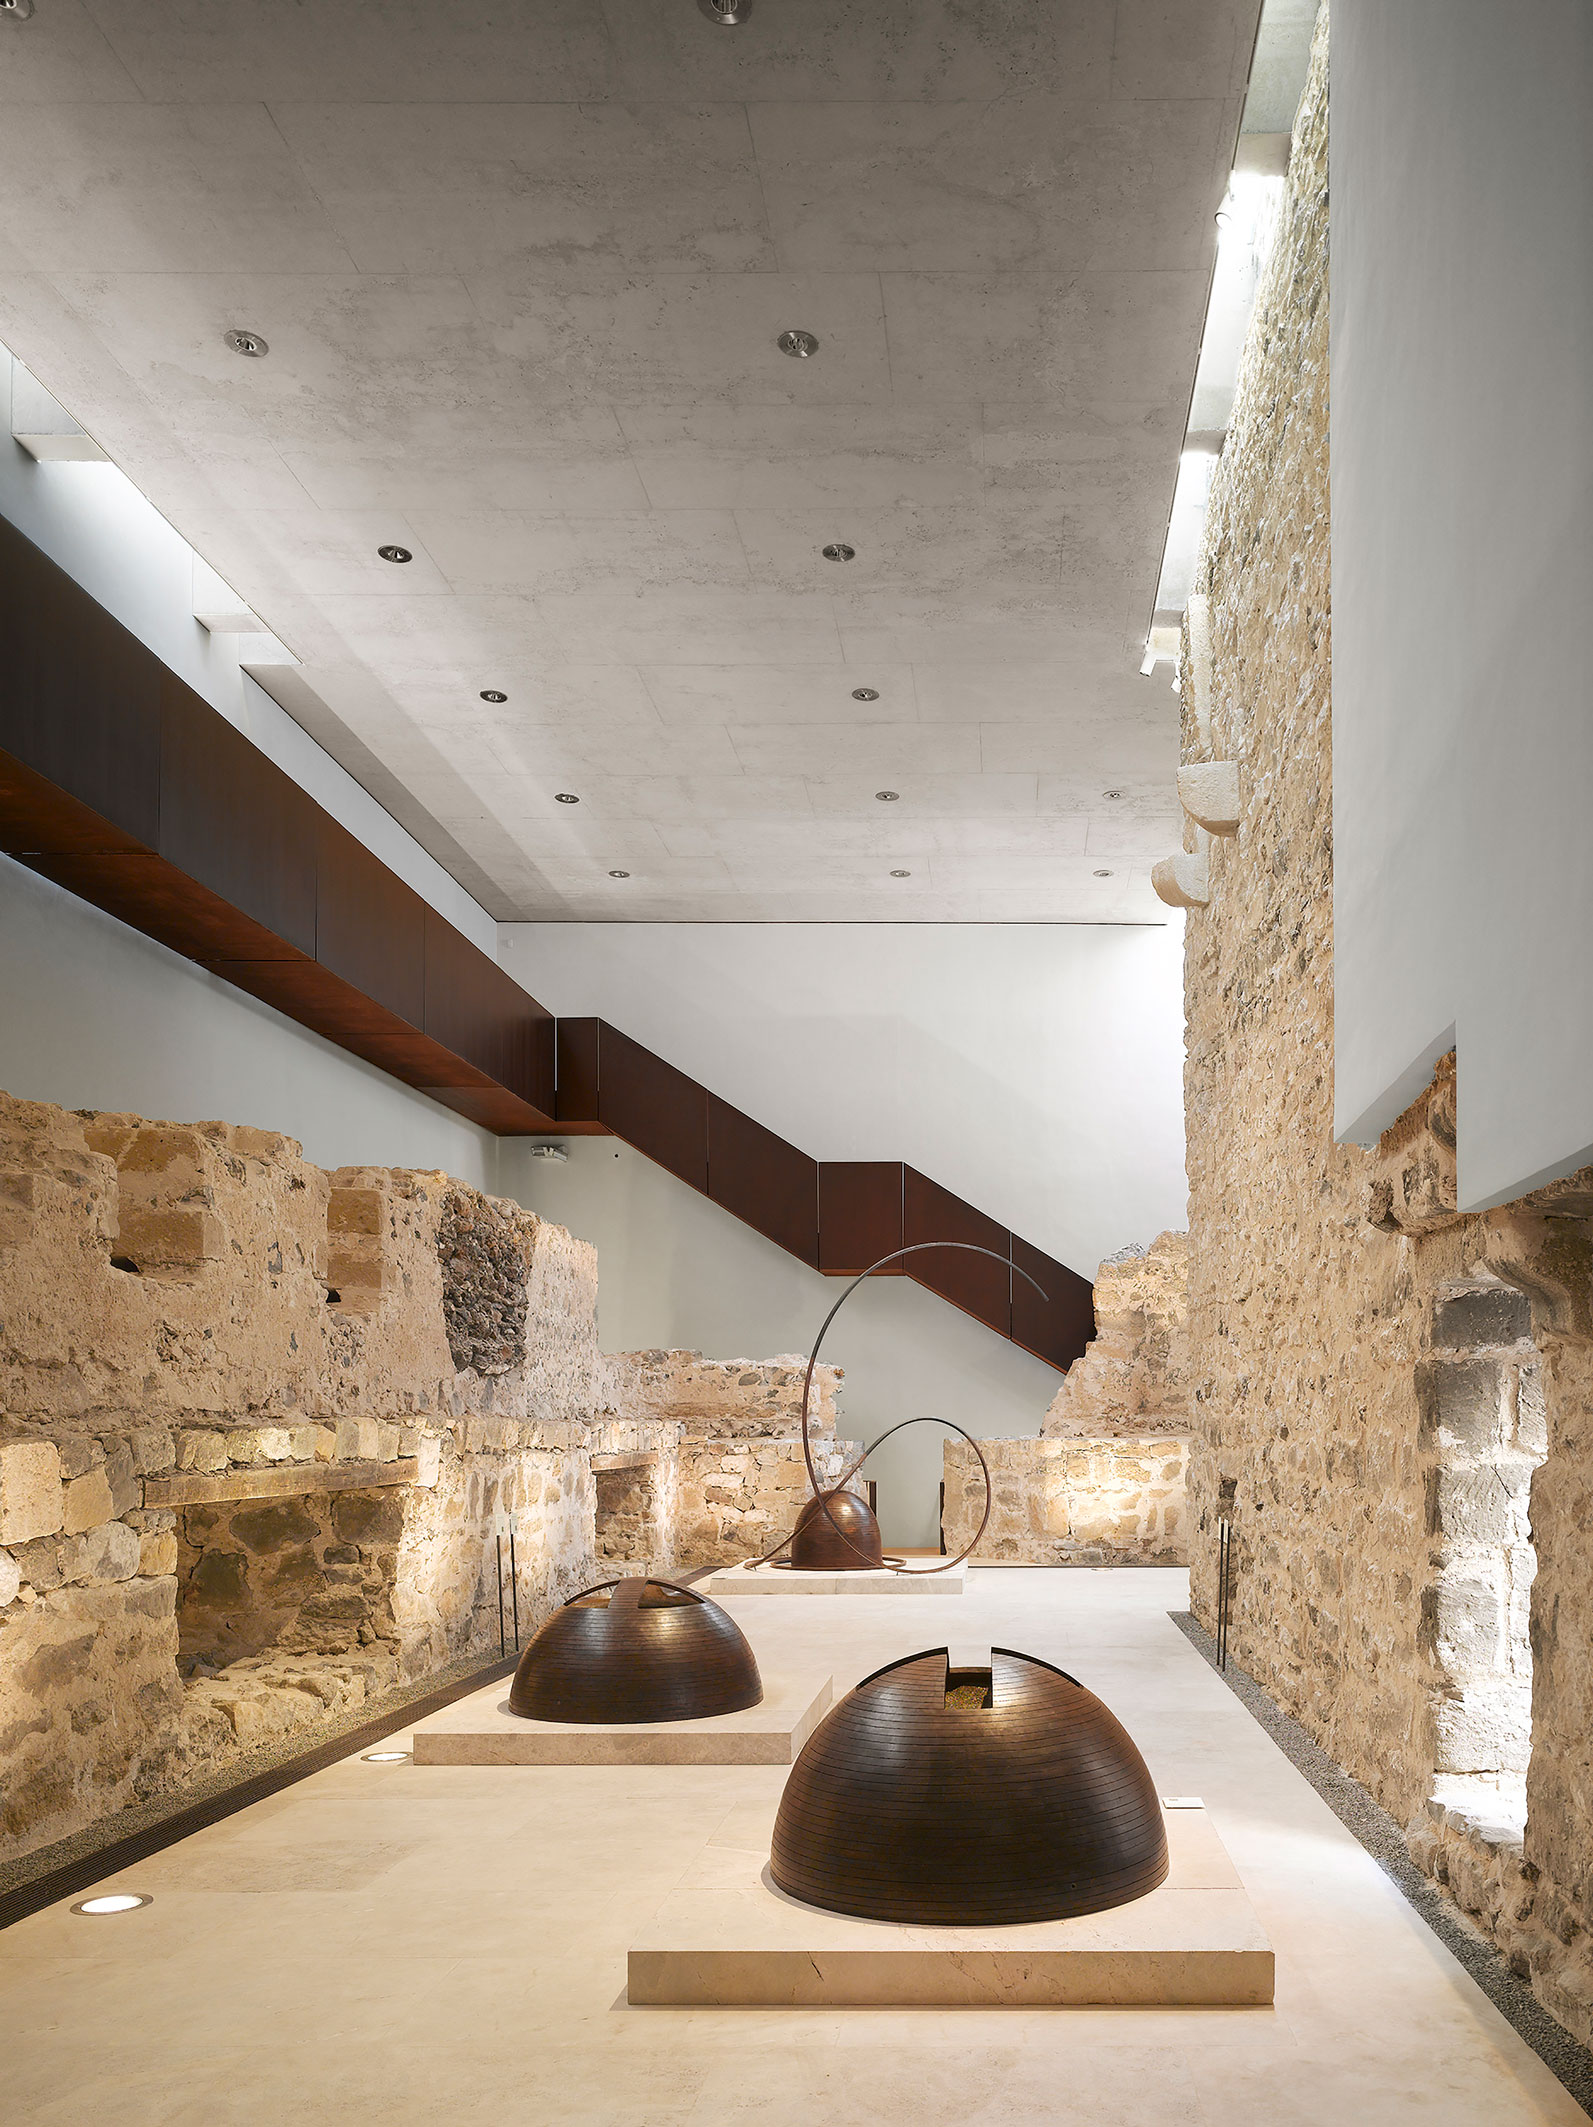 Interior photo of a room made of concrete wood and stone